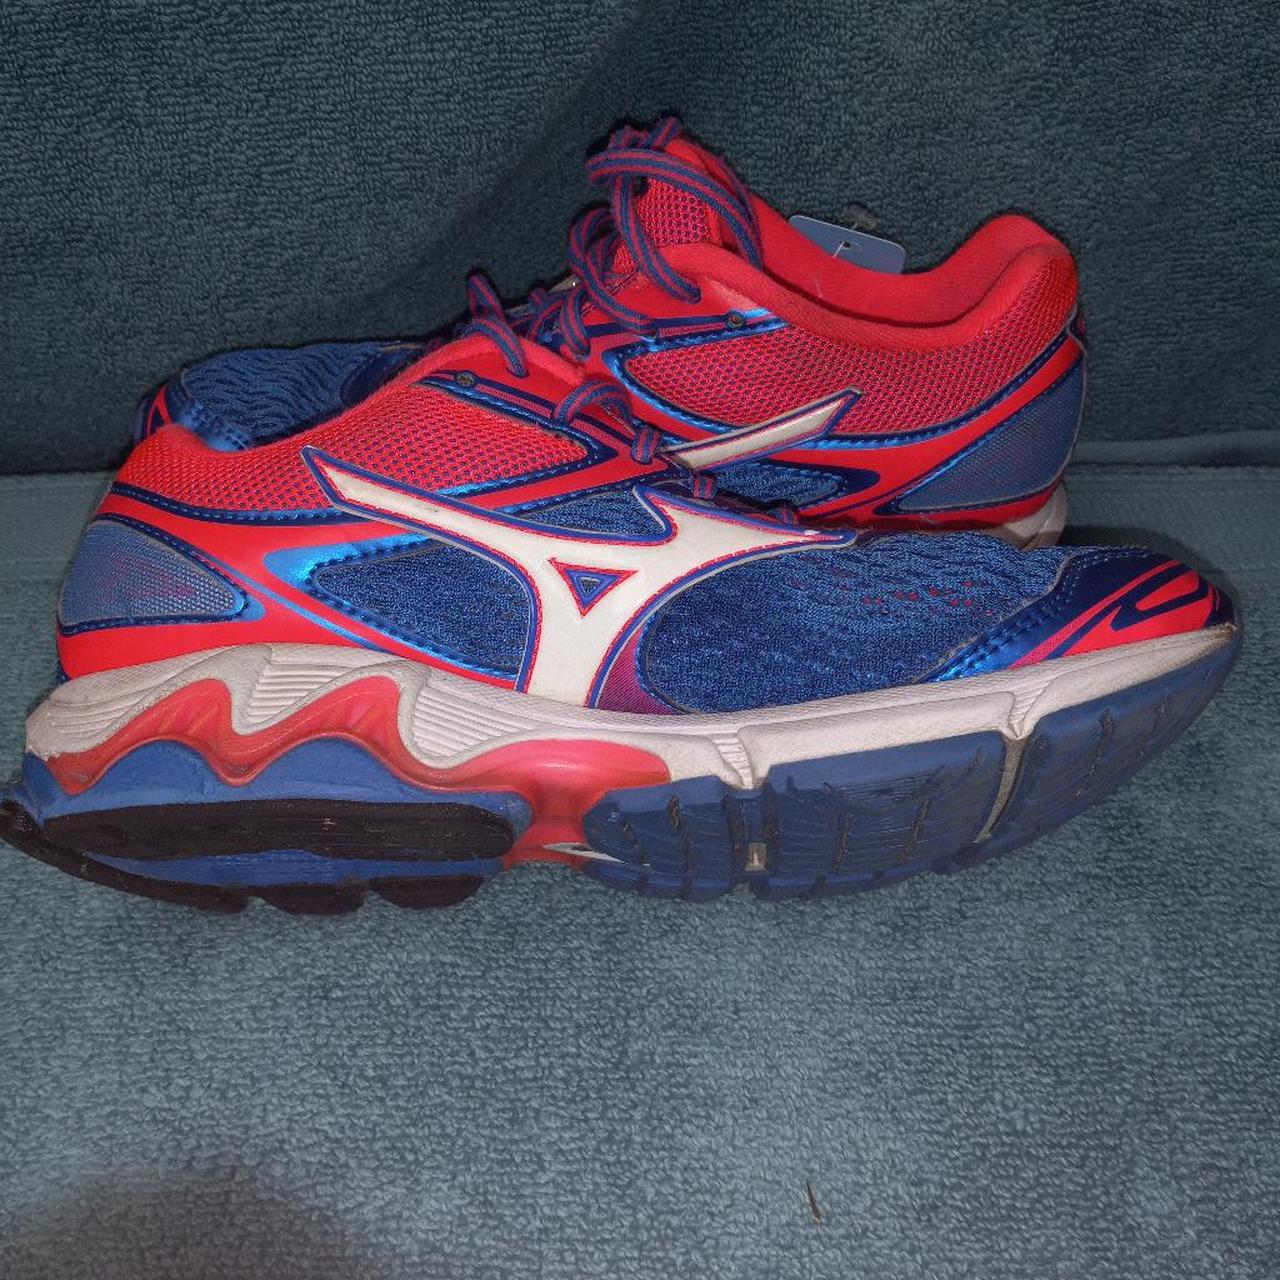 Mizuno Women's Blue and Pink Trainers (2)